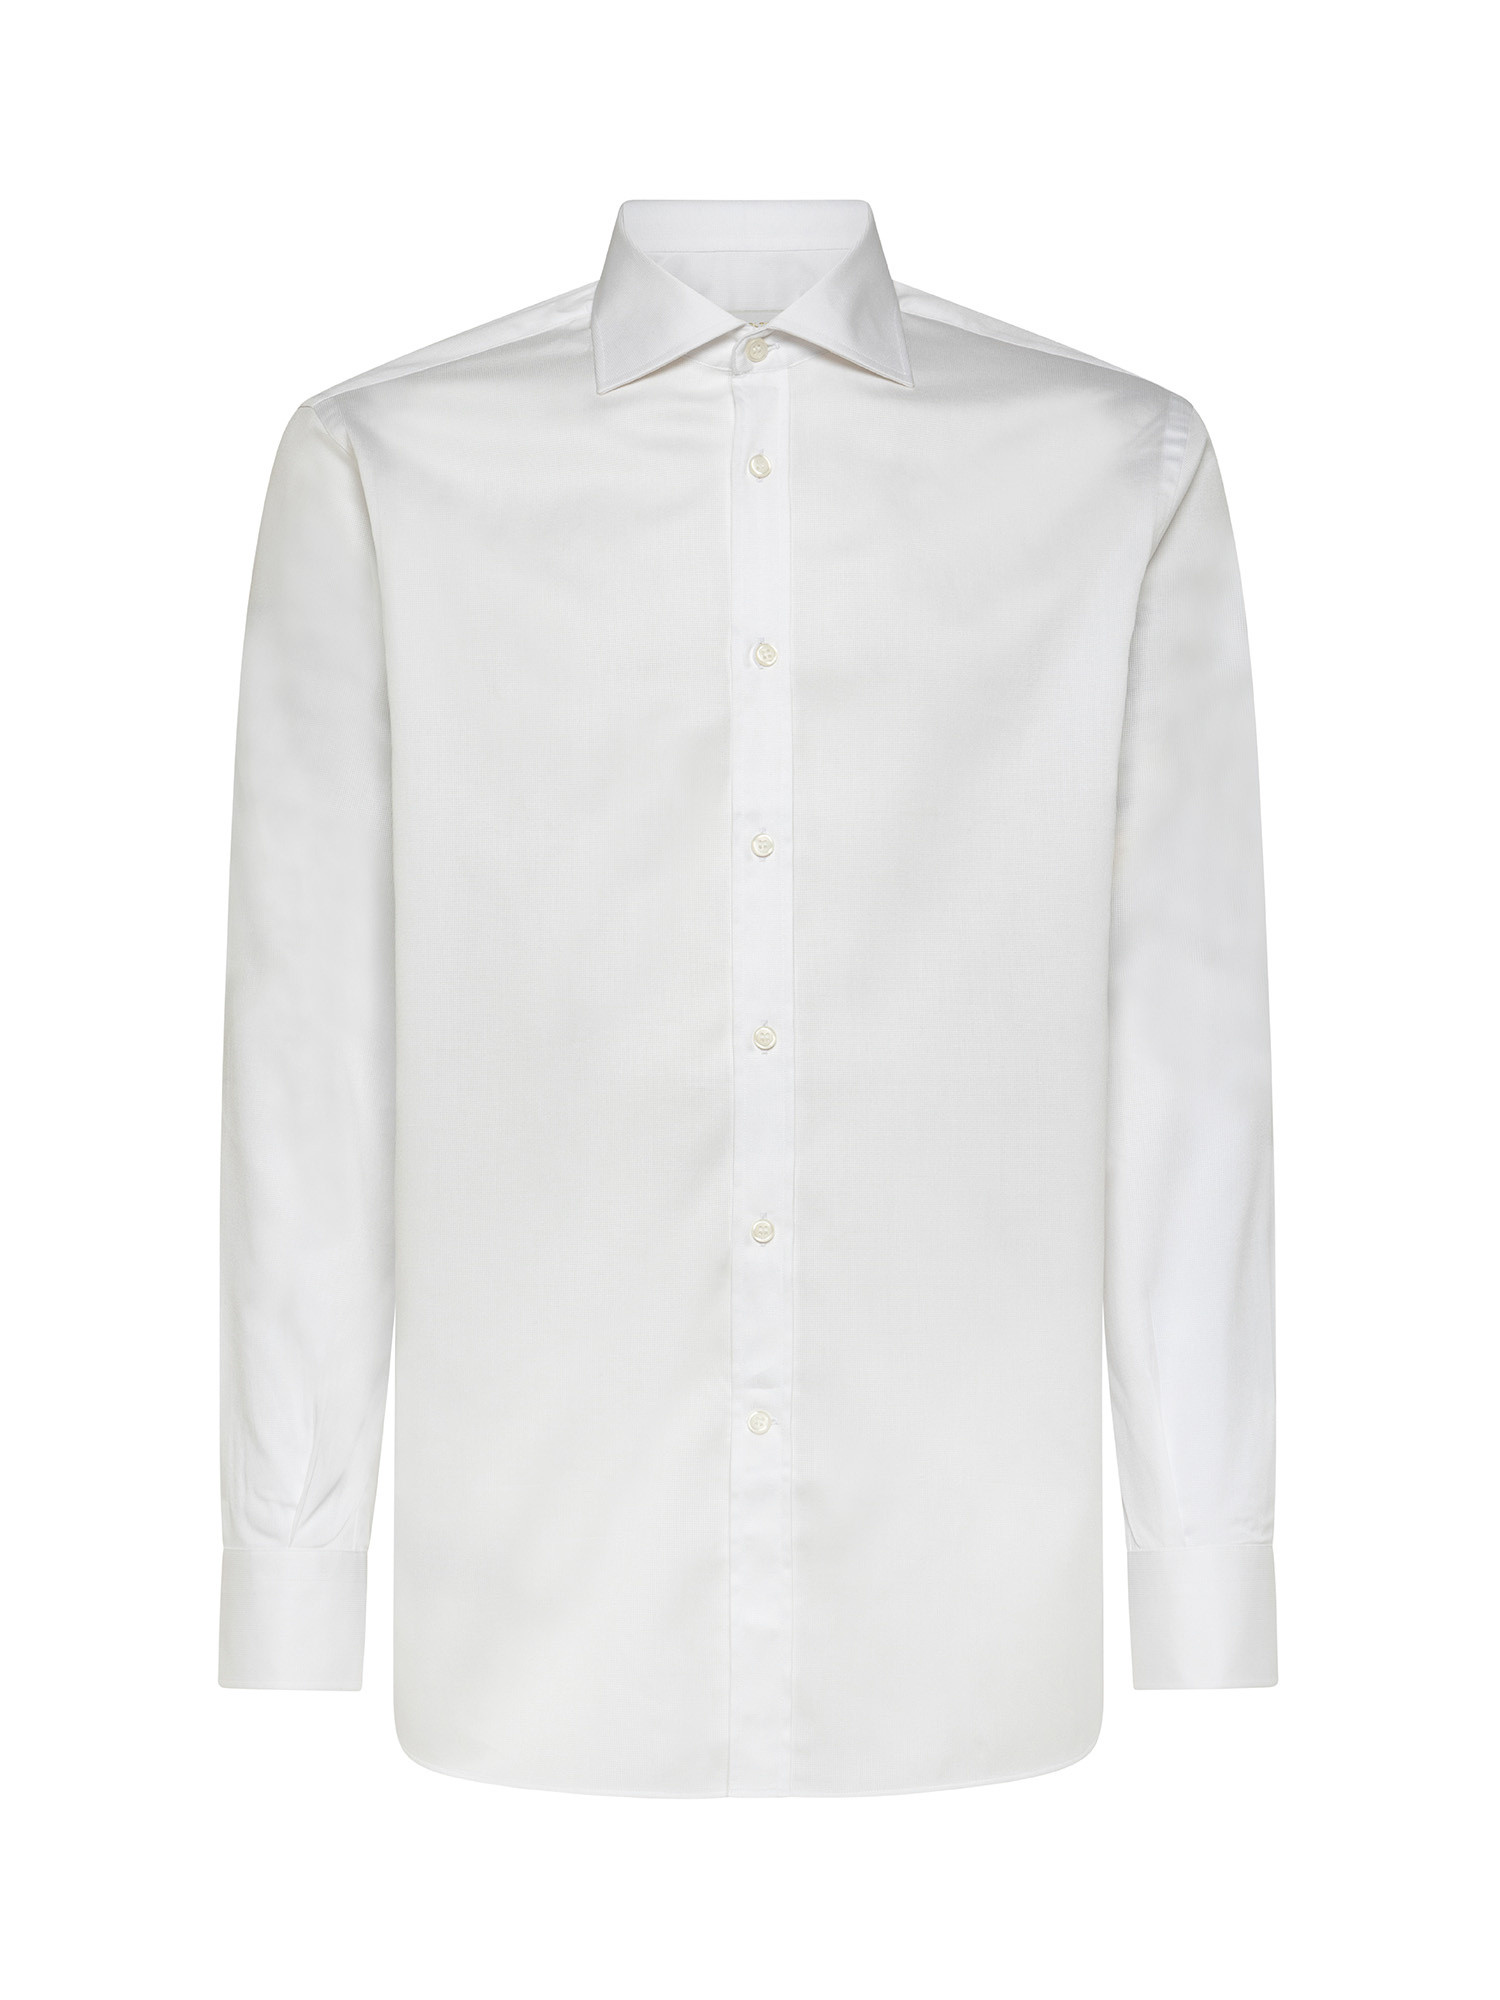 Regular fit shirt in pure cotton, White, large image number 1